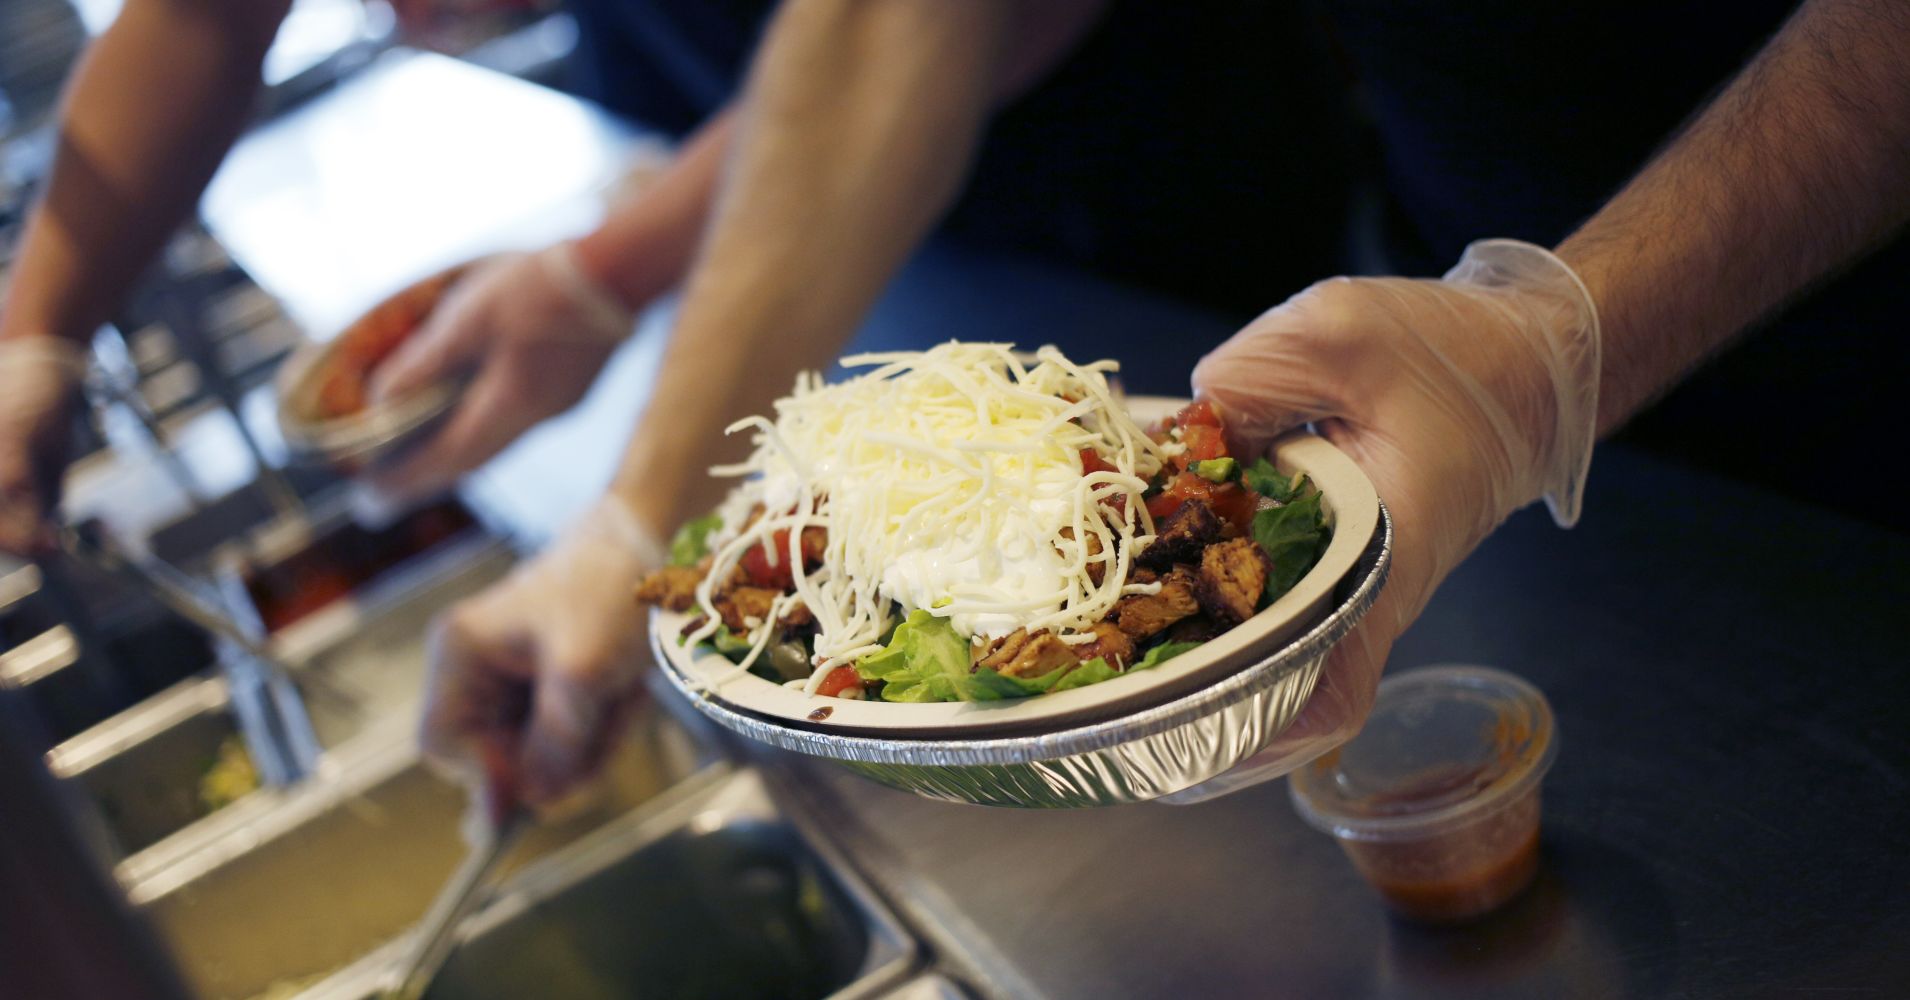 Chipotle's stock drops 6% after disclosing subpoena related to 2018 illness incident